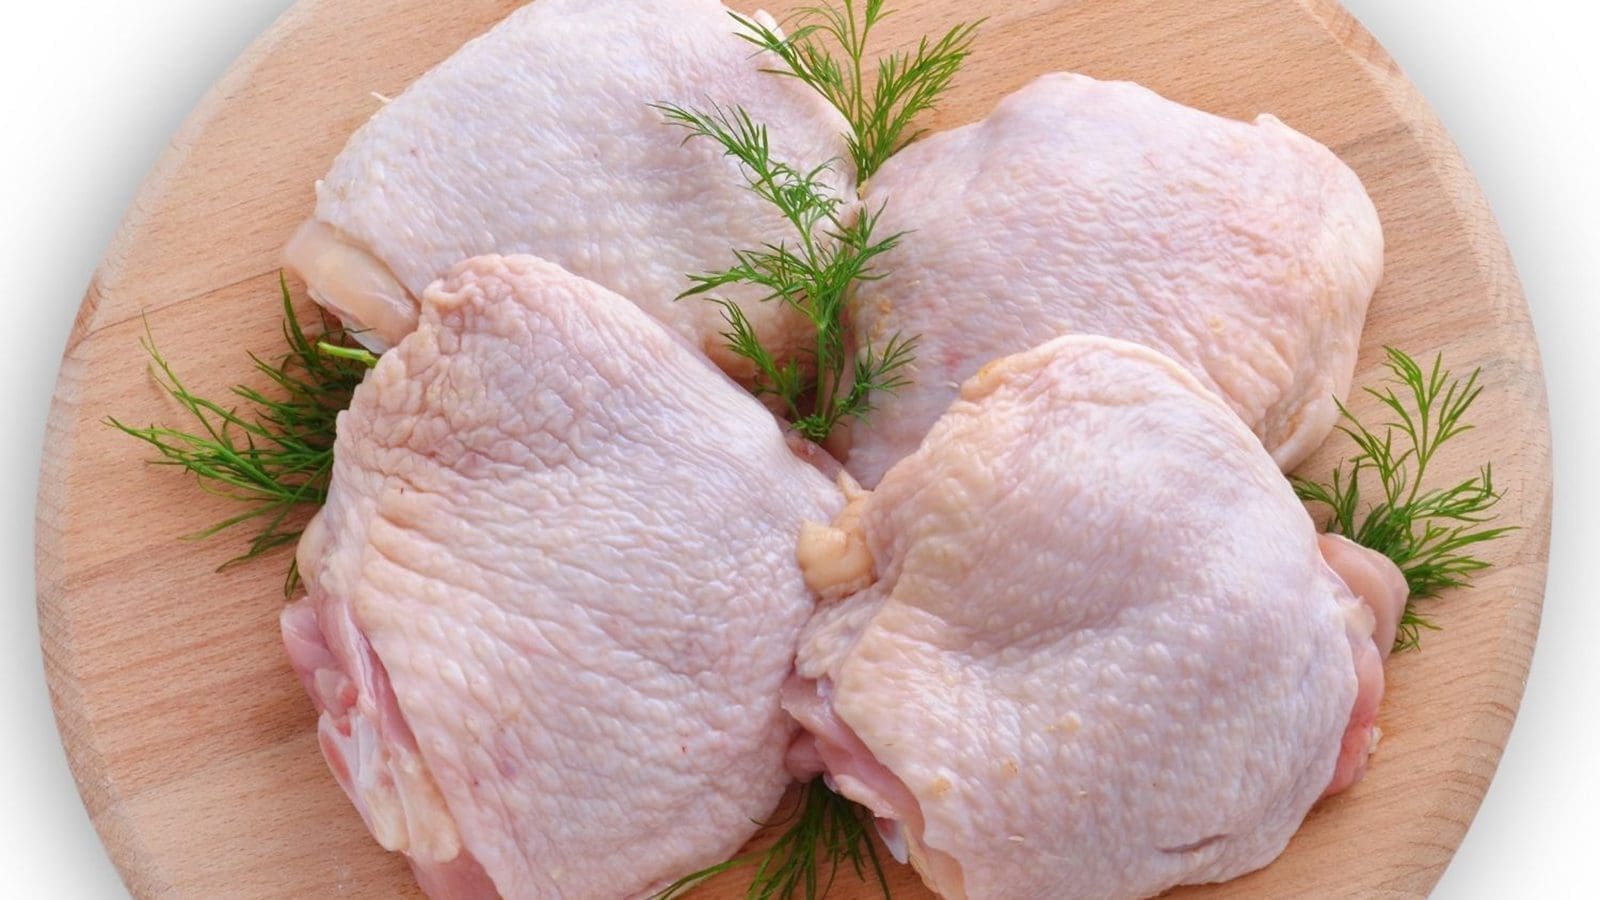 Angola’s poultry sector to register slight growth in chicken meat production in 2022